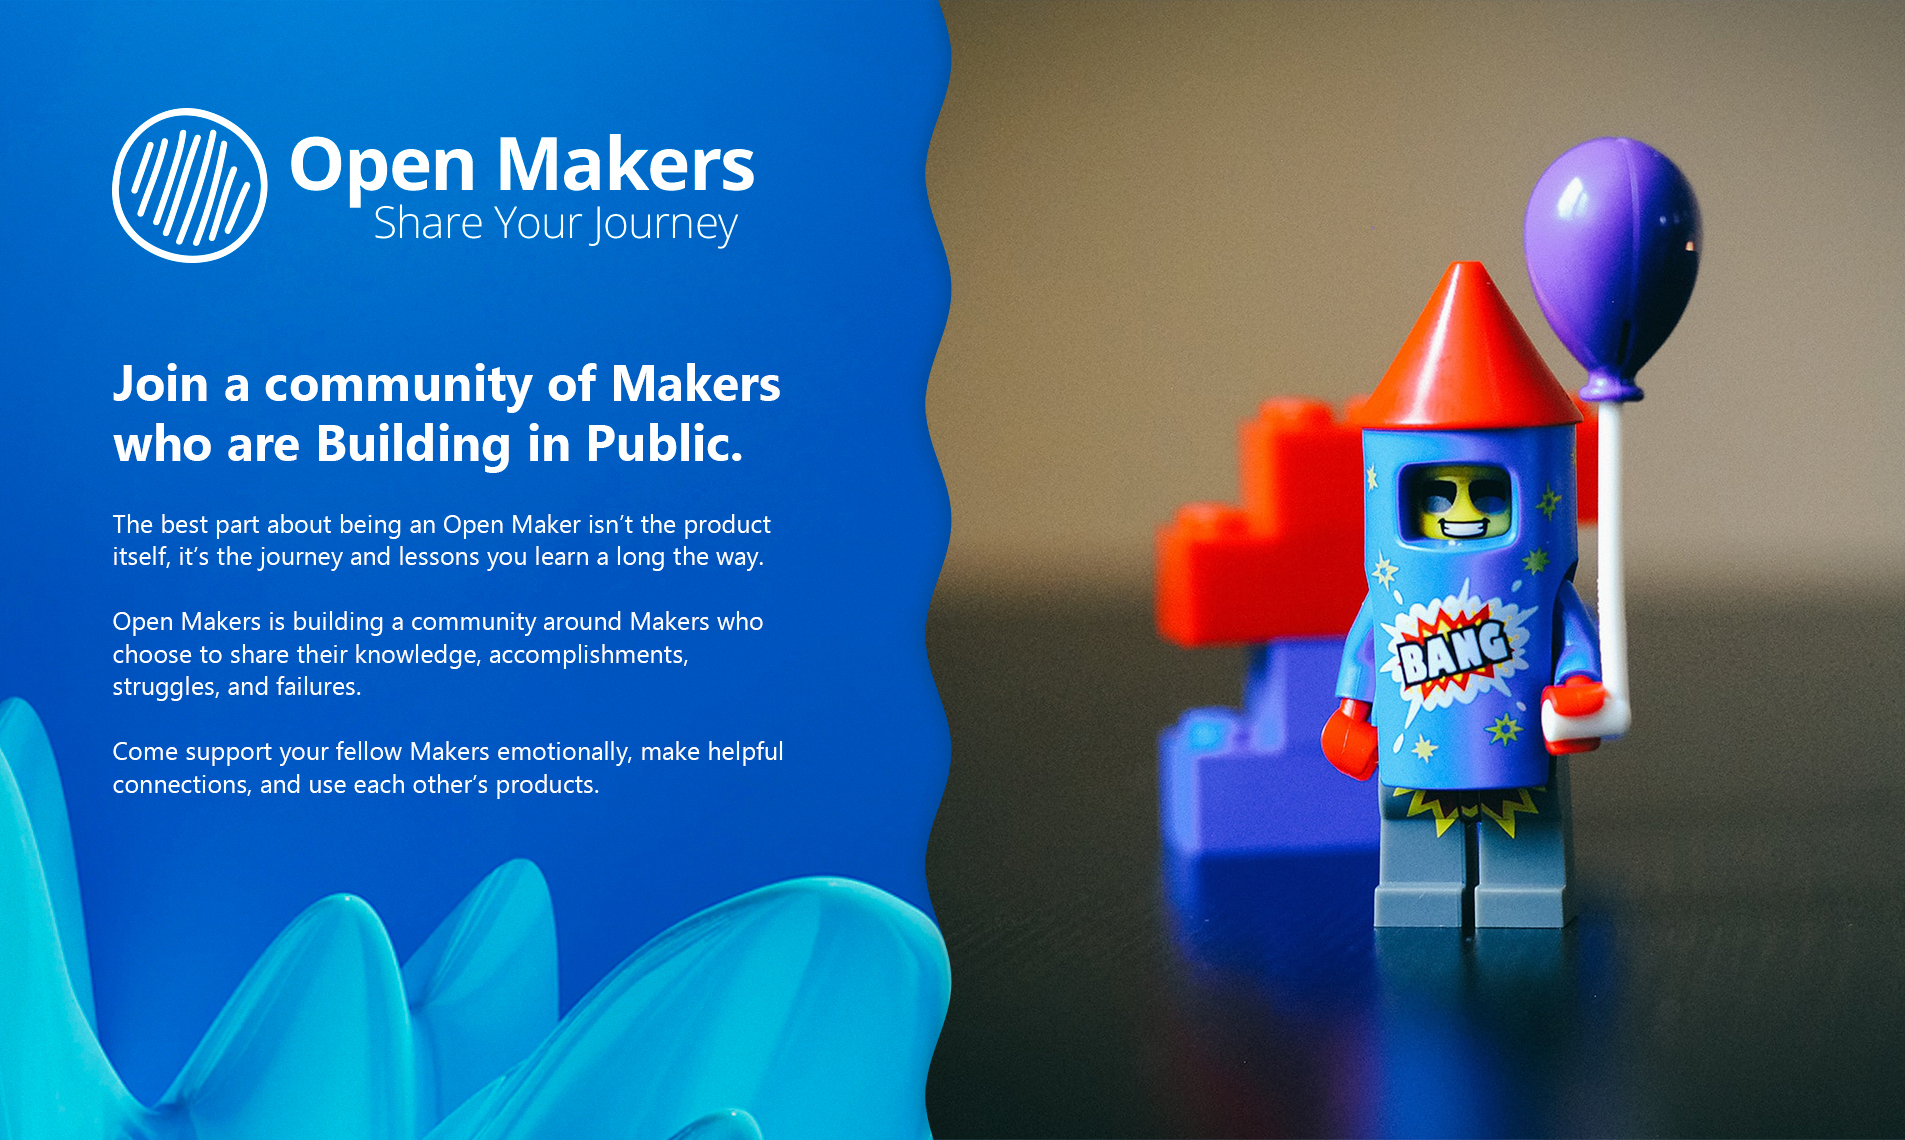 Open Makers: Share Your Journey